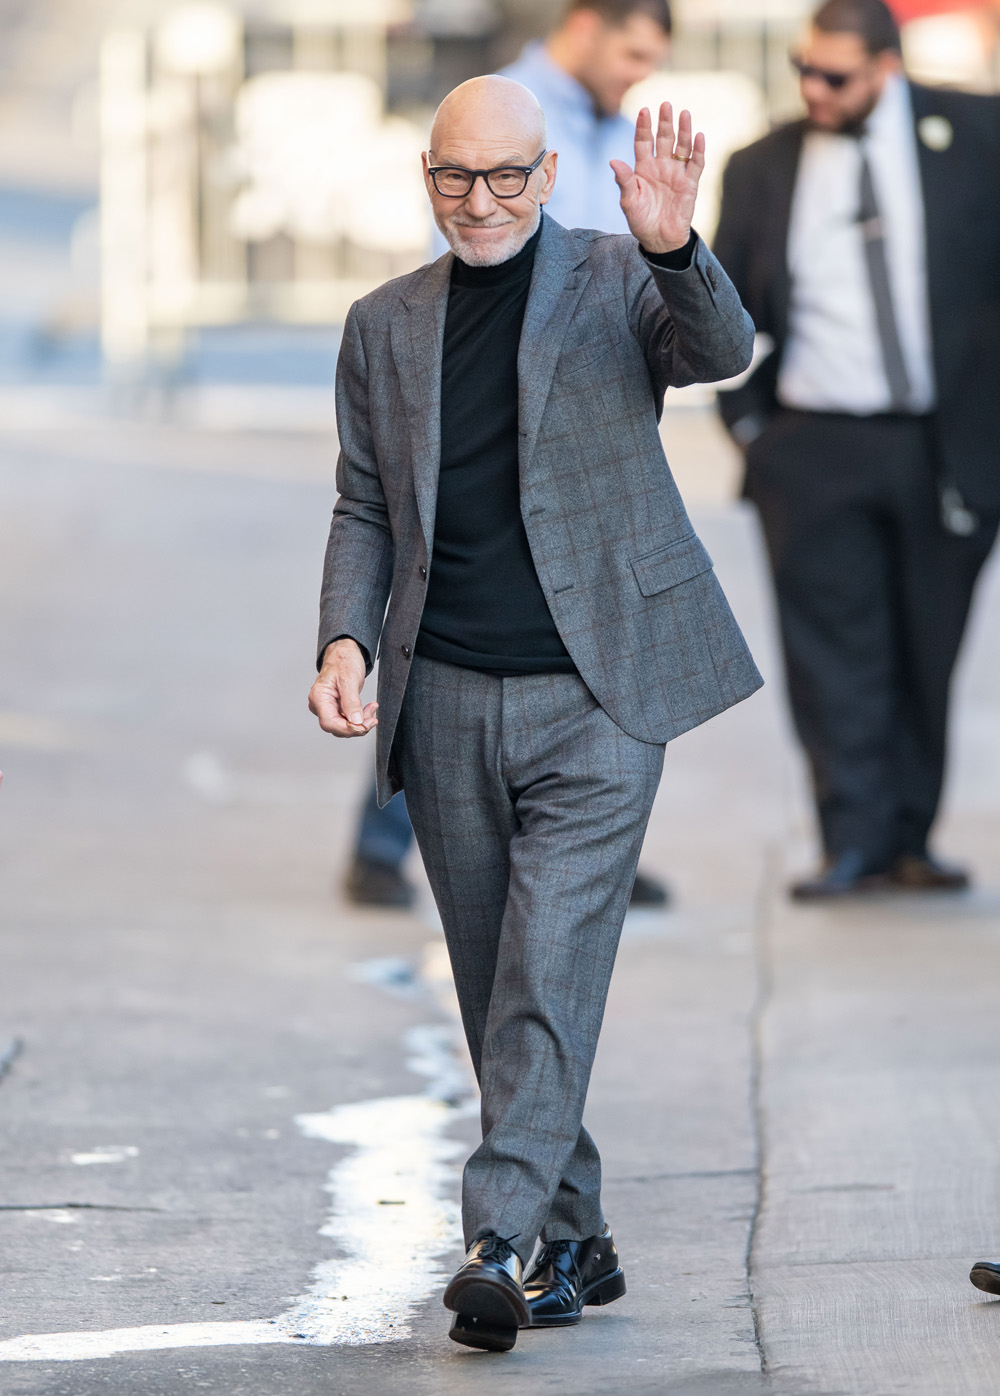 <p>Sir Patrick Stewart waves while arriving for a Nov. 12, 2019 appearance on ‘Jimmy Kimmel Live!’ He wore a grey suit with a subtle brown grid on it.</p>